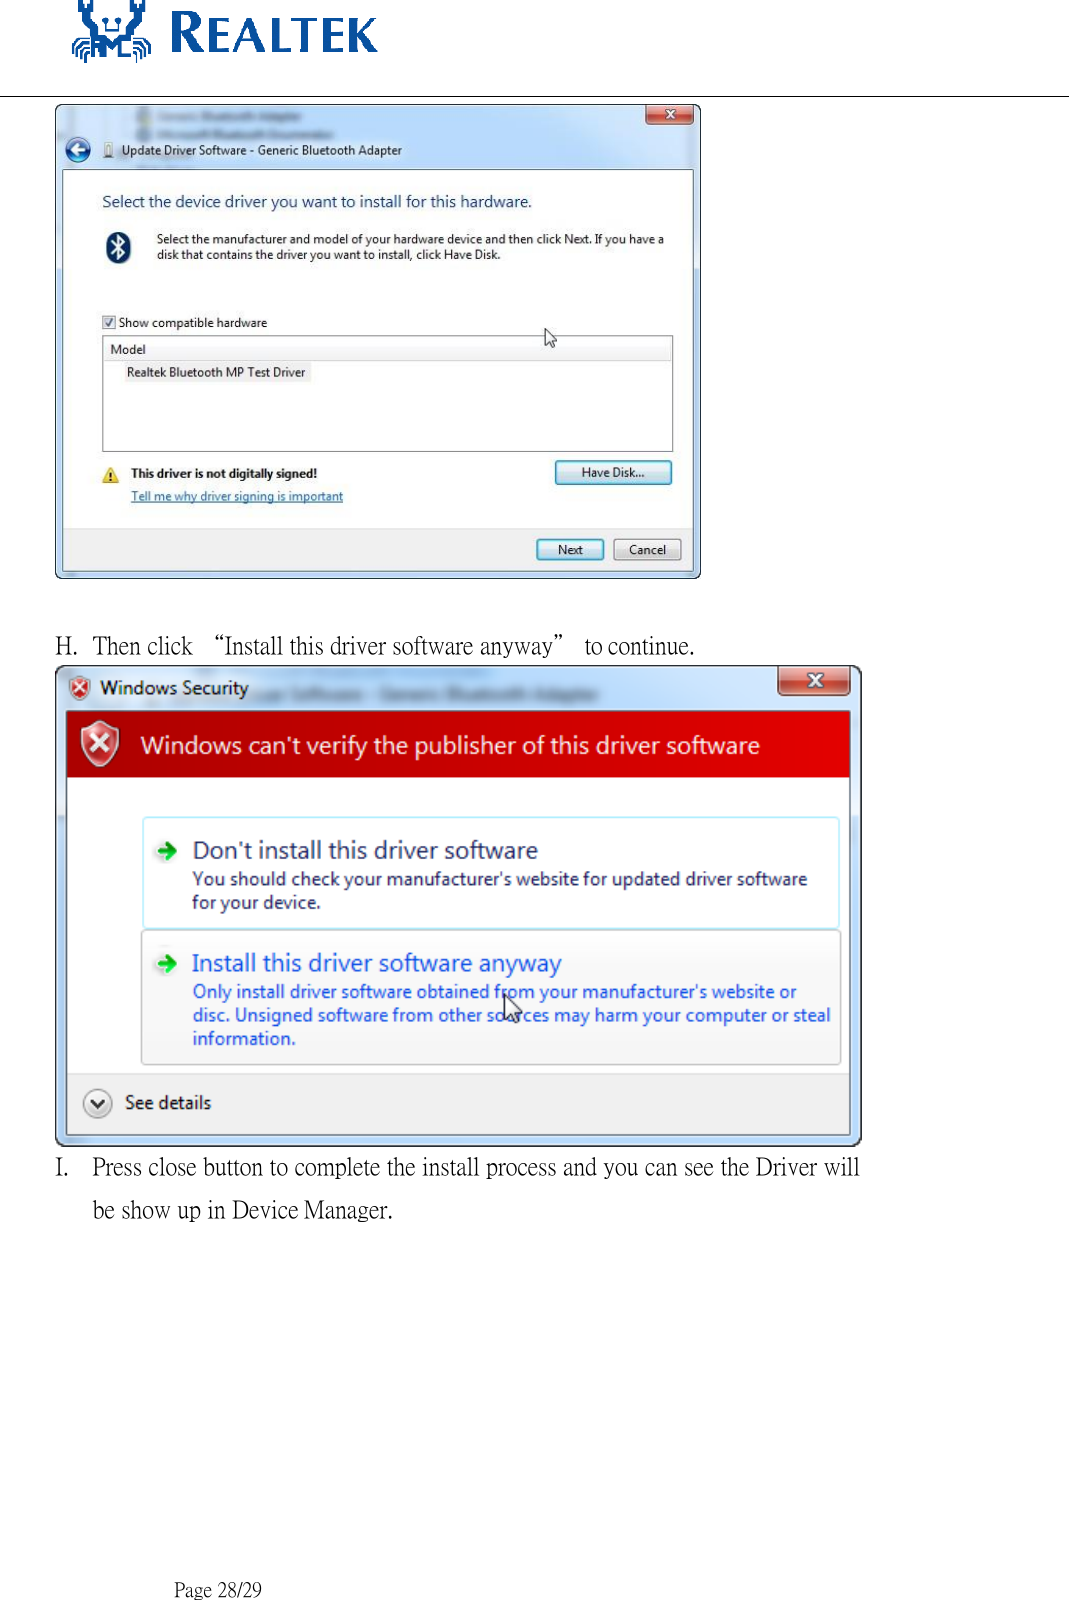     H. Then click “Install this driver software anyway” to continue. I. Press close button to complete the install process and you can see the Driver will be show up in Device Manager.             Page 28/29 